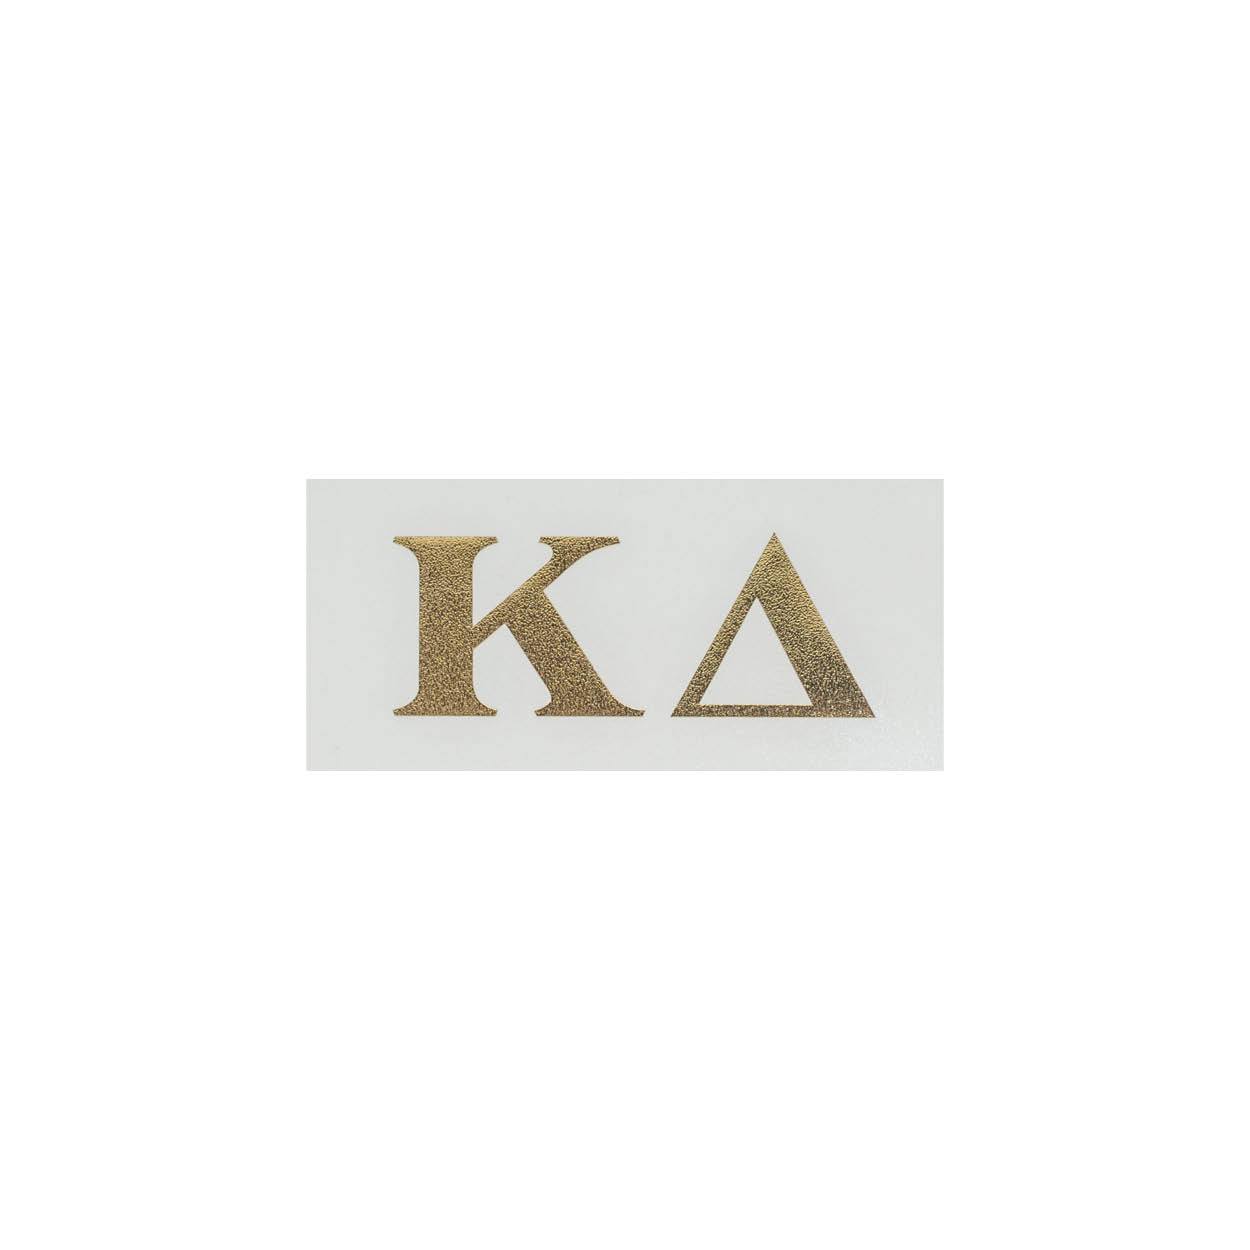 Gold Foil Decal Greek in Kappa Delta at Wrapsody